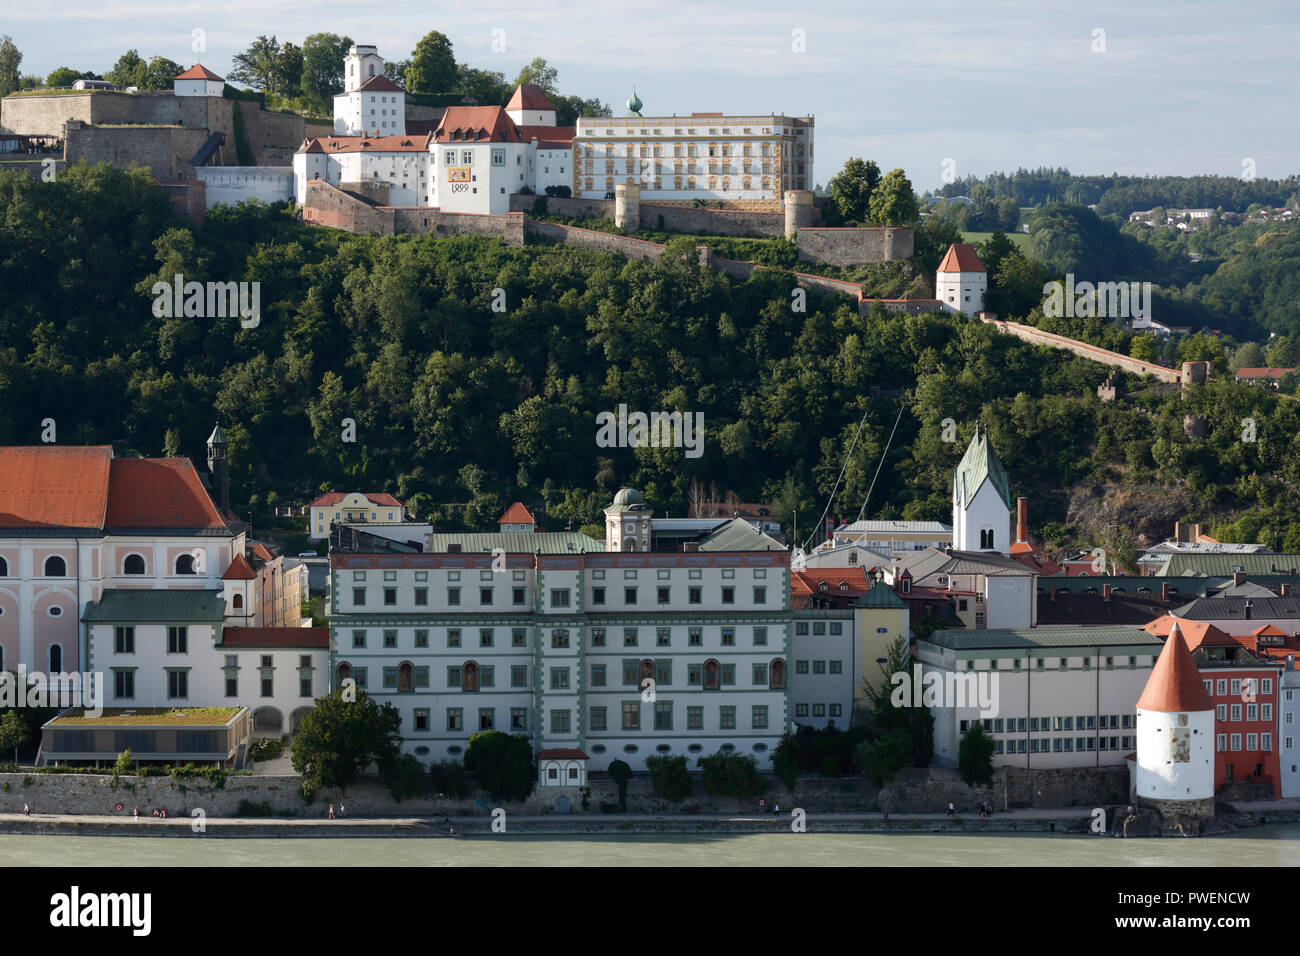 D-Passau, Danube, Inn, Ilz, panoramic view with Danube bank and old town, f.l.t.r. Leopoldinum high school, former Jesuit college, Veste Oberhaus with Oberhaus Museum on the Georg Hill, Monastery Niedernburg with tomb of the Blessed Gisella, Schaibling tower, town tower, baroque Stock Photo